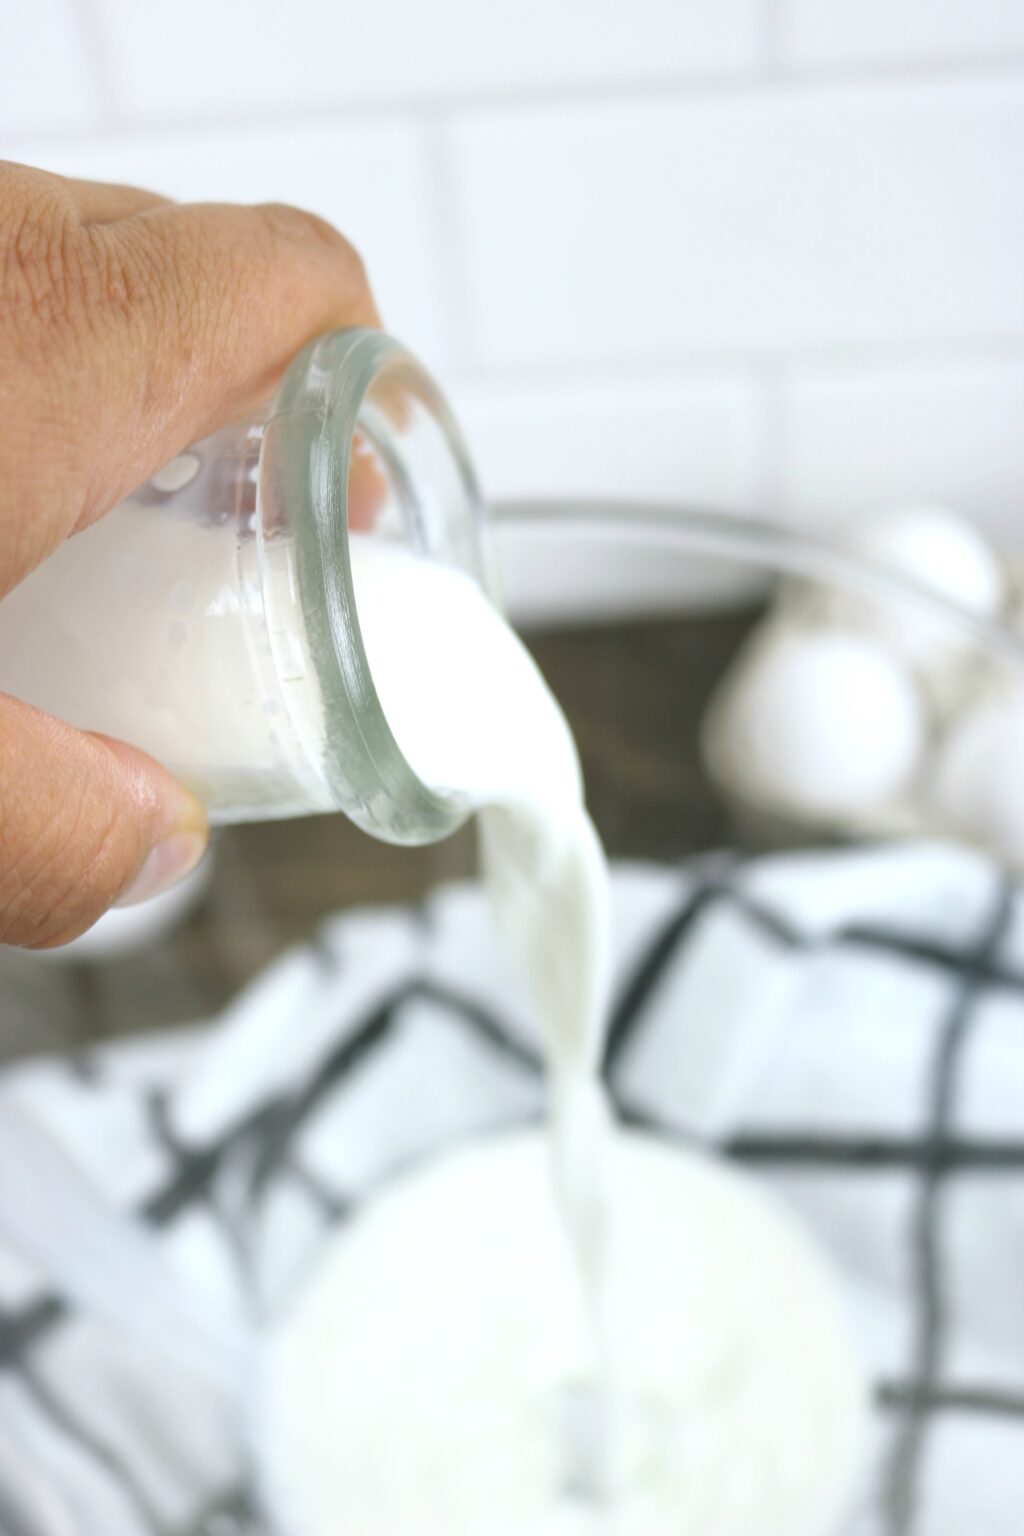 Half and half cream being poured into glass bowl. Napkin and eggs are pictured in the background. 